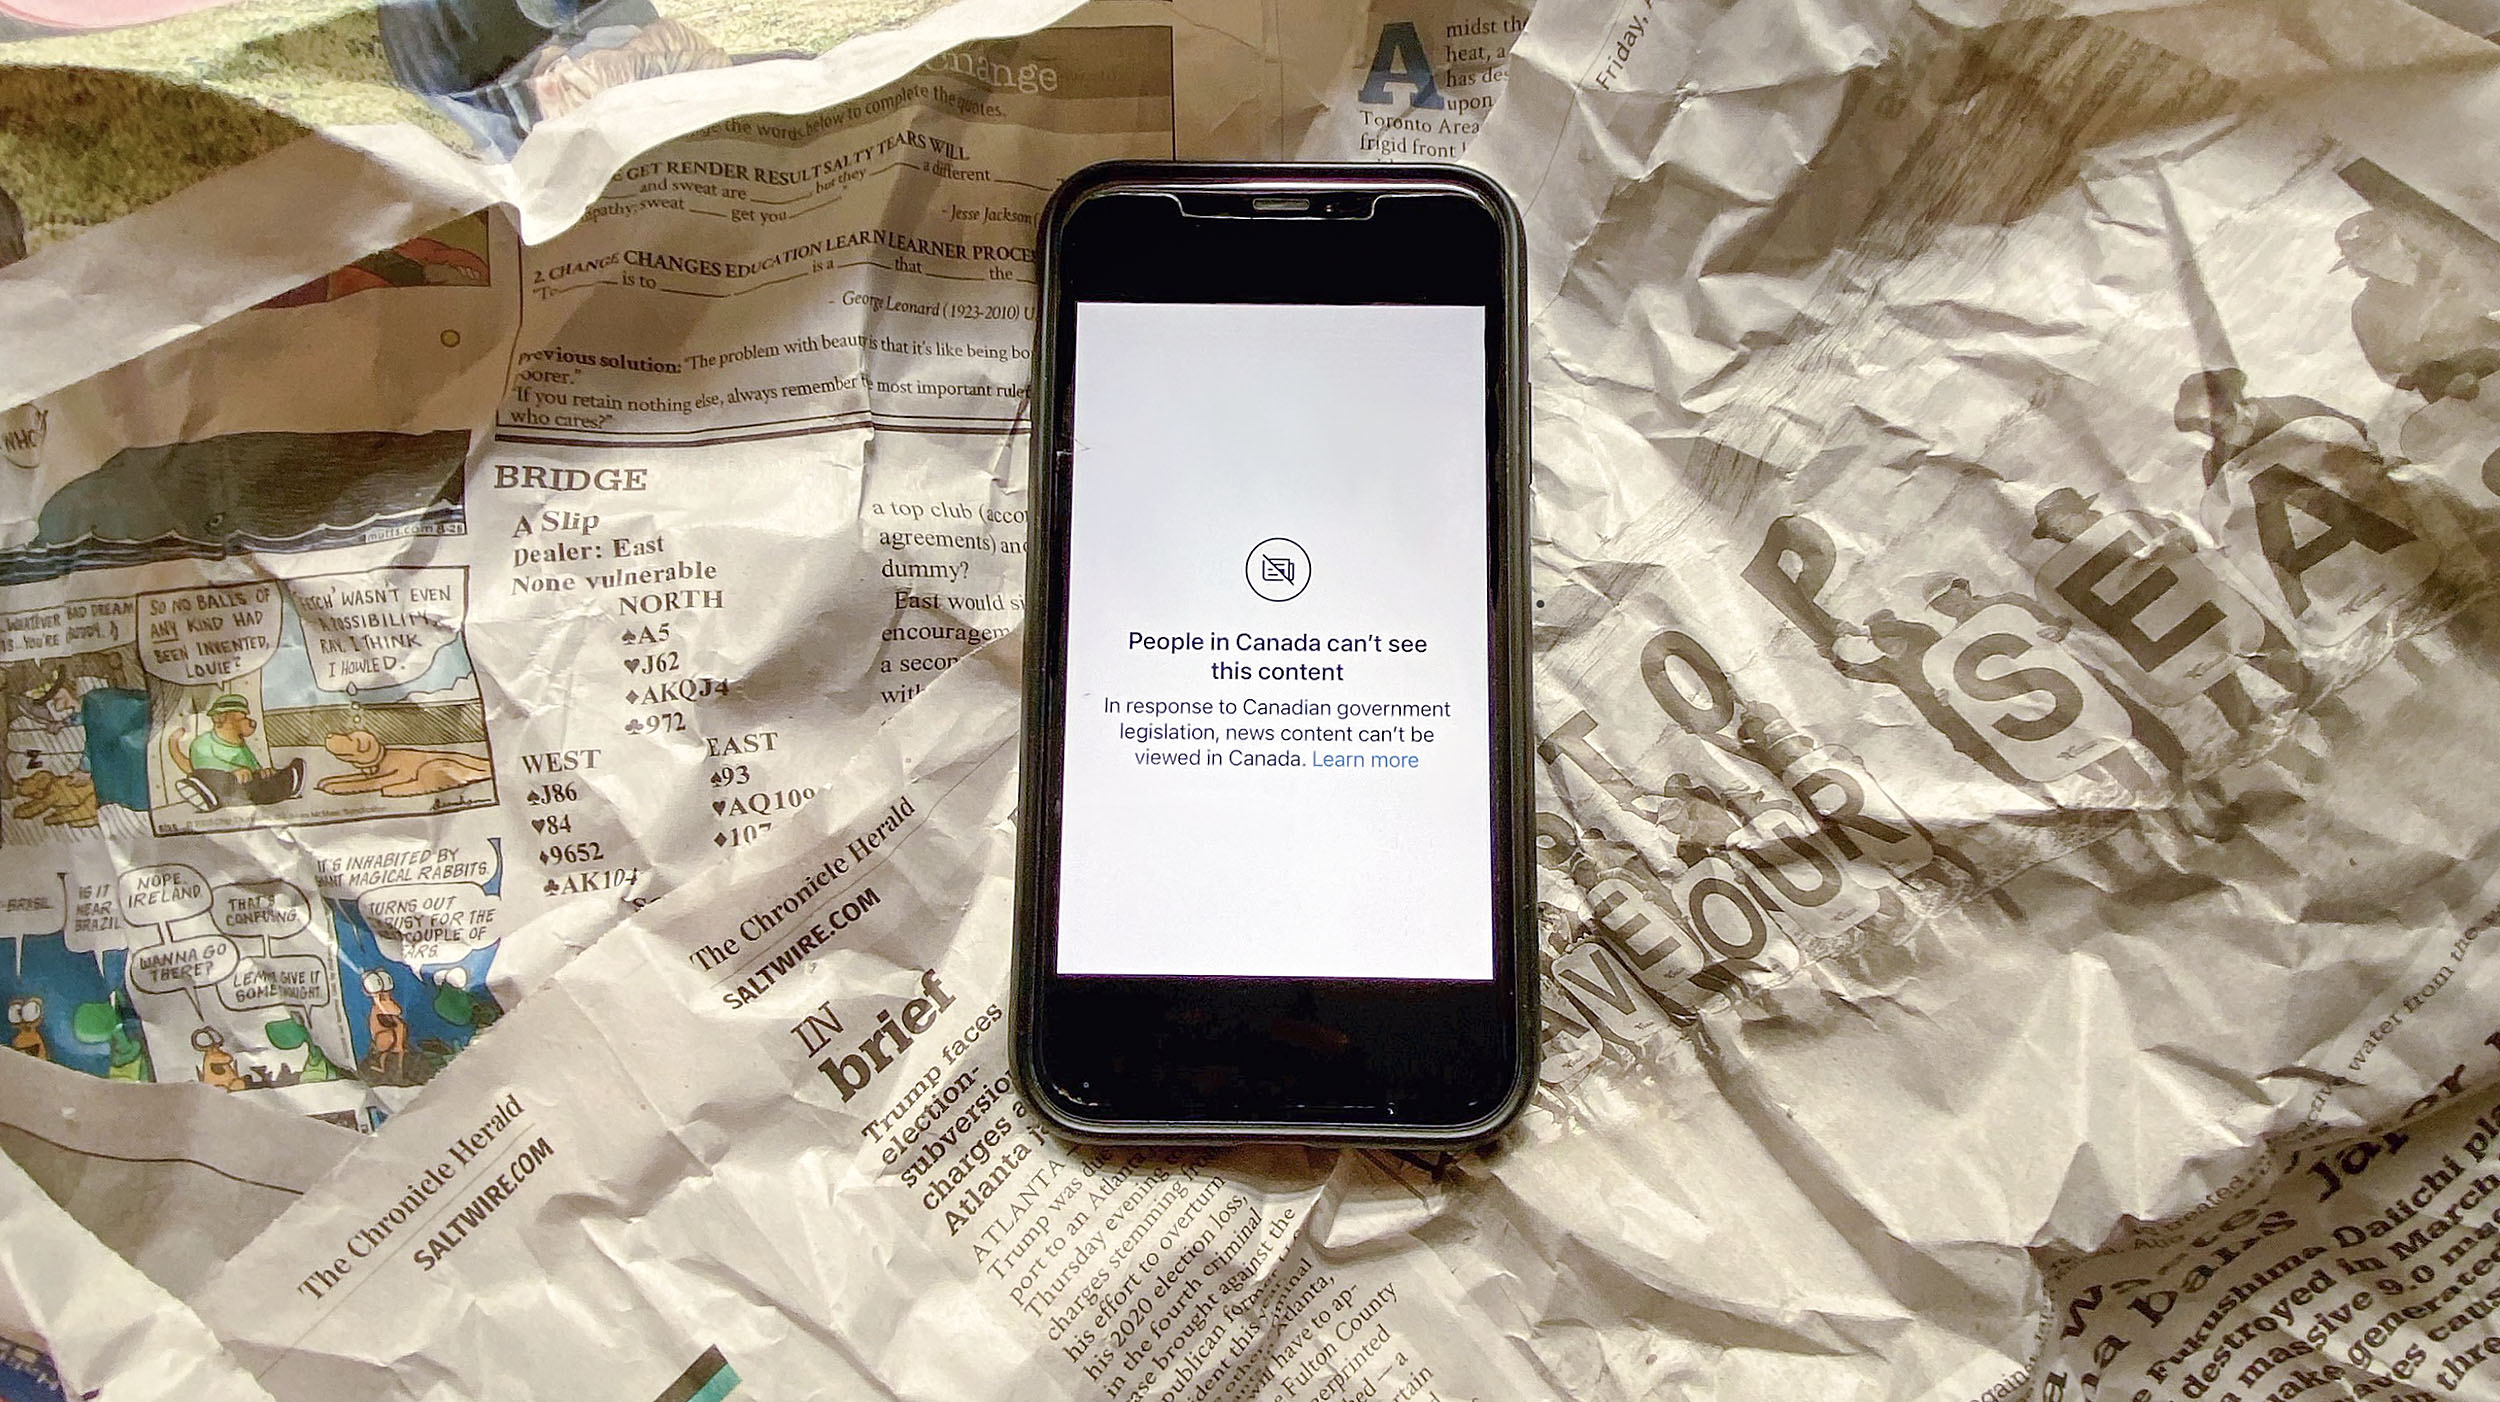 A phone with a blocked news site sits on a crumpled up newspaper.